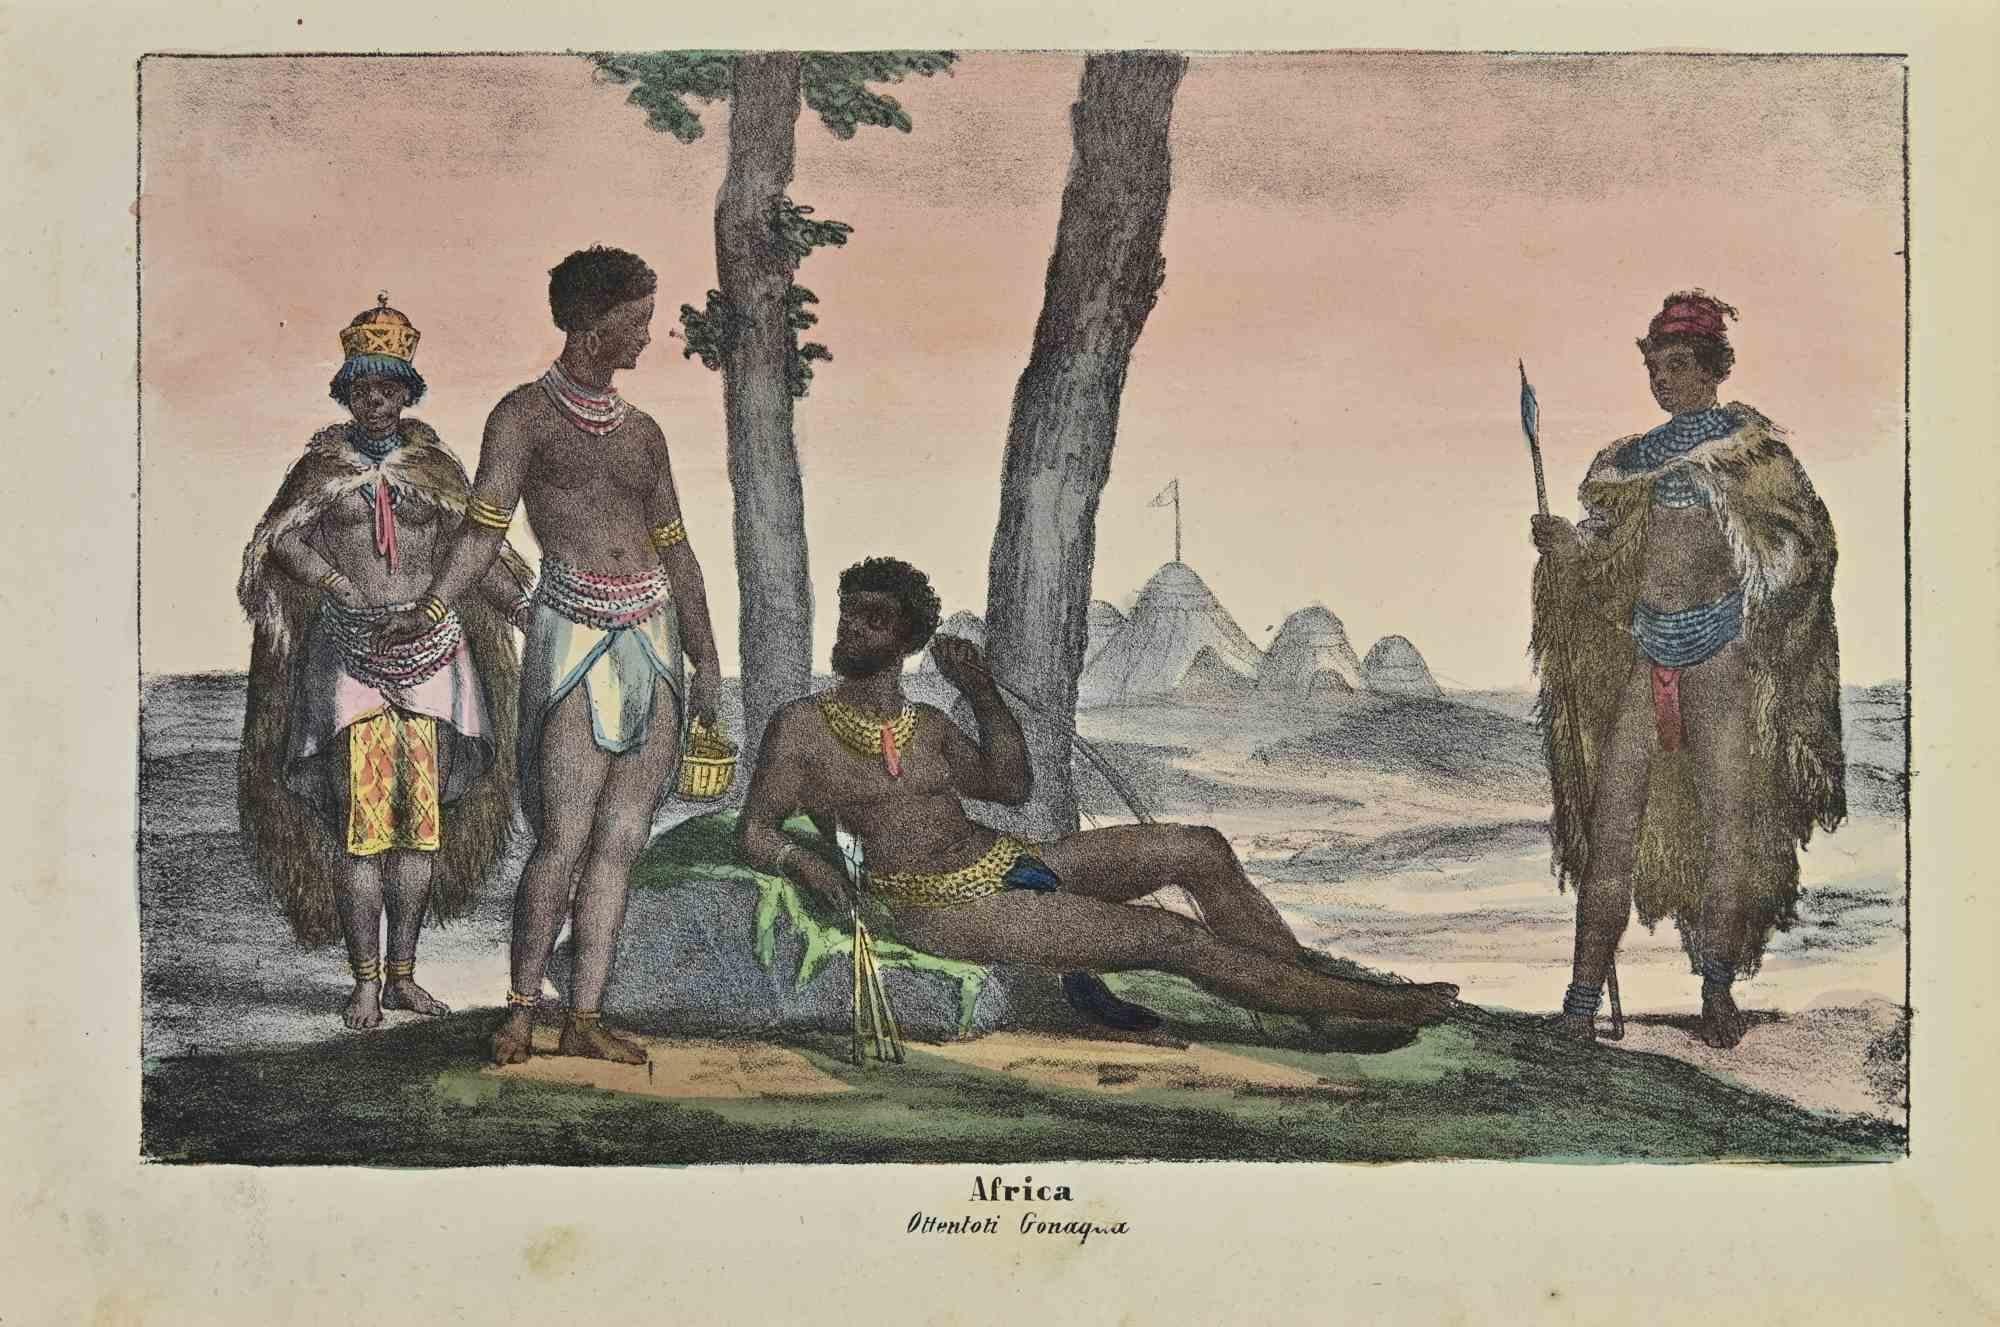 Ancient African Customs is a lithograph realized by Auguste Wahlen in 1844.

Hand colored.

Good condition.

At the center of the artwork is the original title "Africa" and subtitle "Ottentoti Gonaqua".

The work is part of Suite Moeurs, usages et